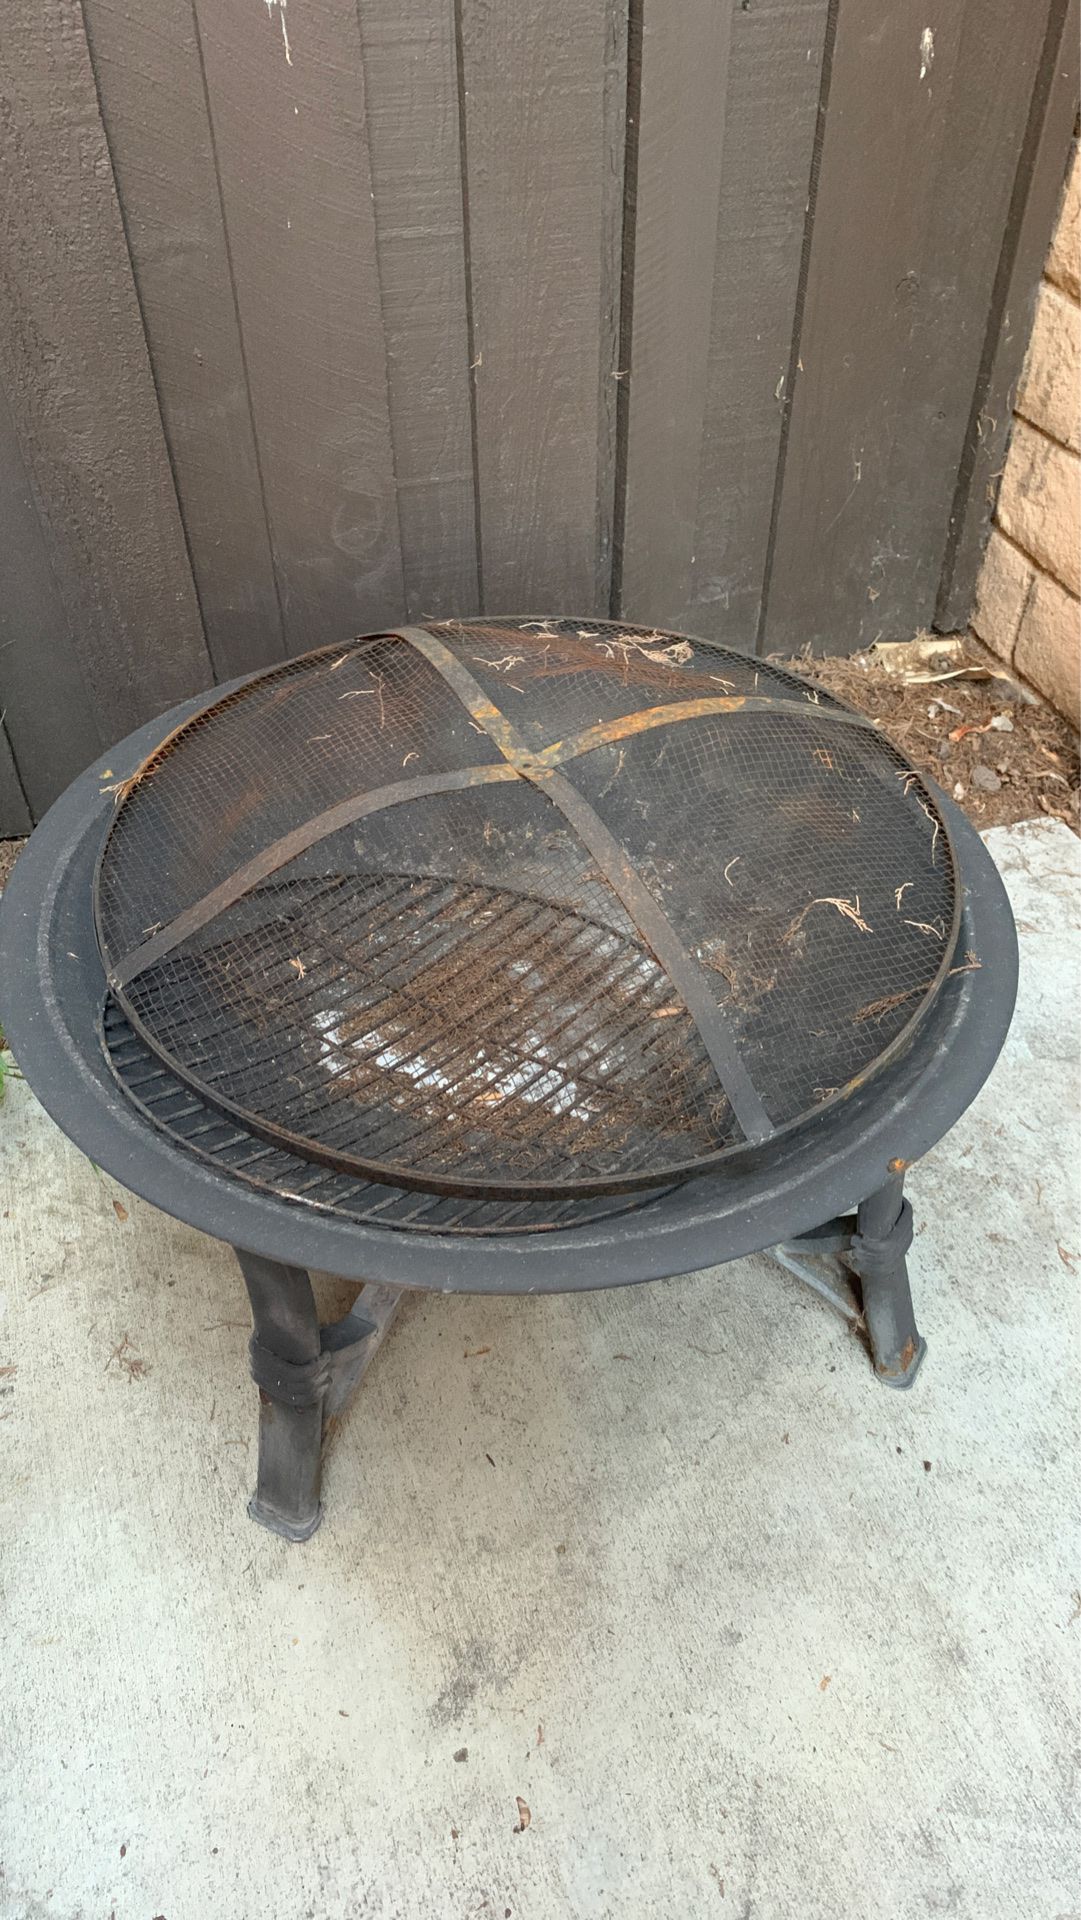 Fire pit - 30 inches